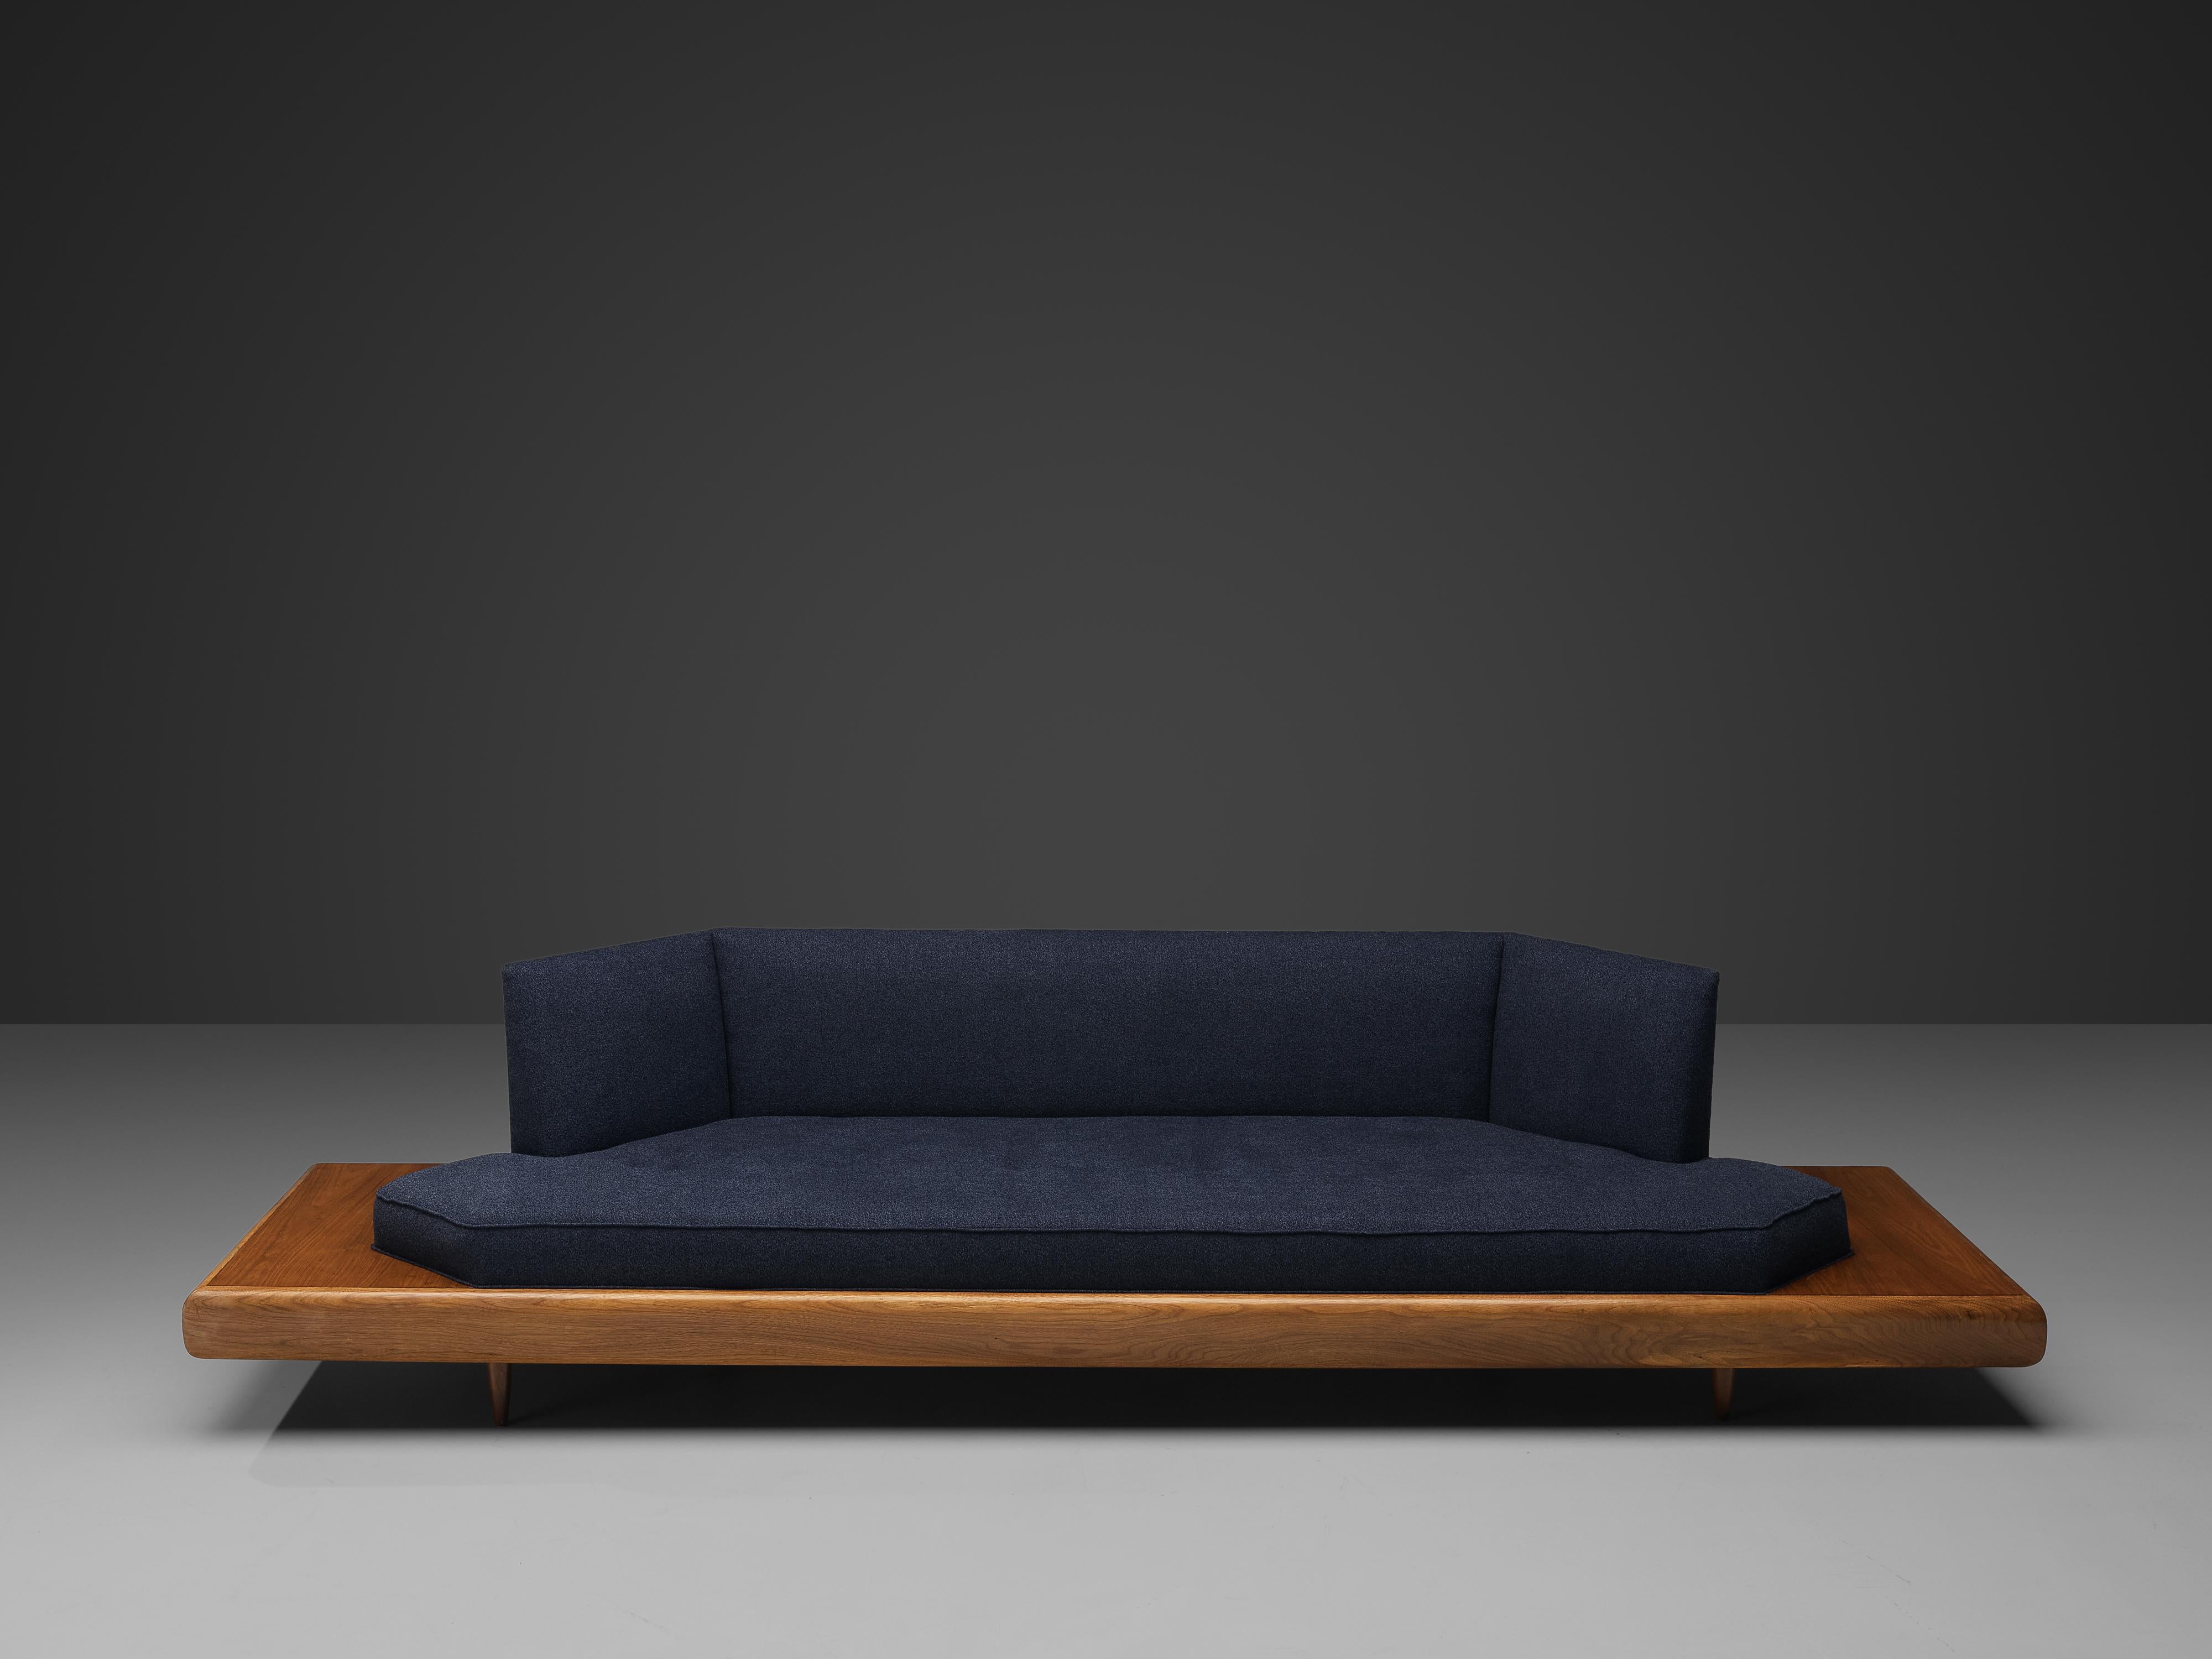 Adrian Pearsall, sofa model '2006S', fabric, walnut, United States, 1960s.

Classic, soft shaped sofa has a unique feel and although it is modest and simplistic it also shows soft, delicate lines and shapes. The walnut frame extends past the